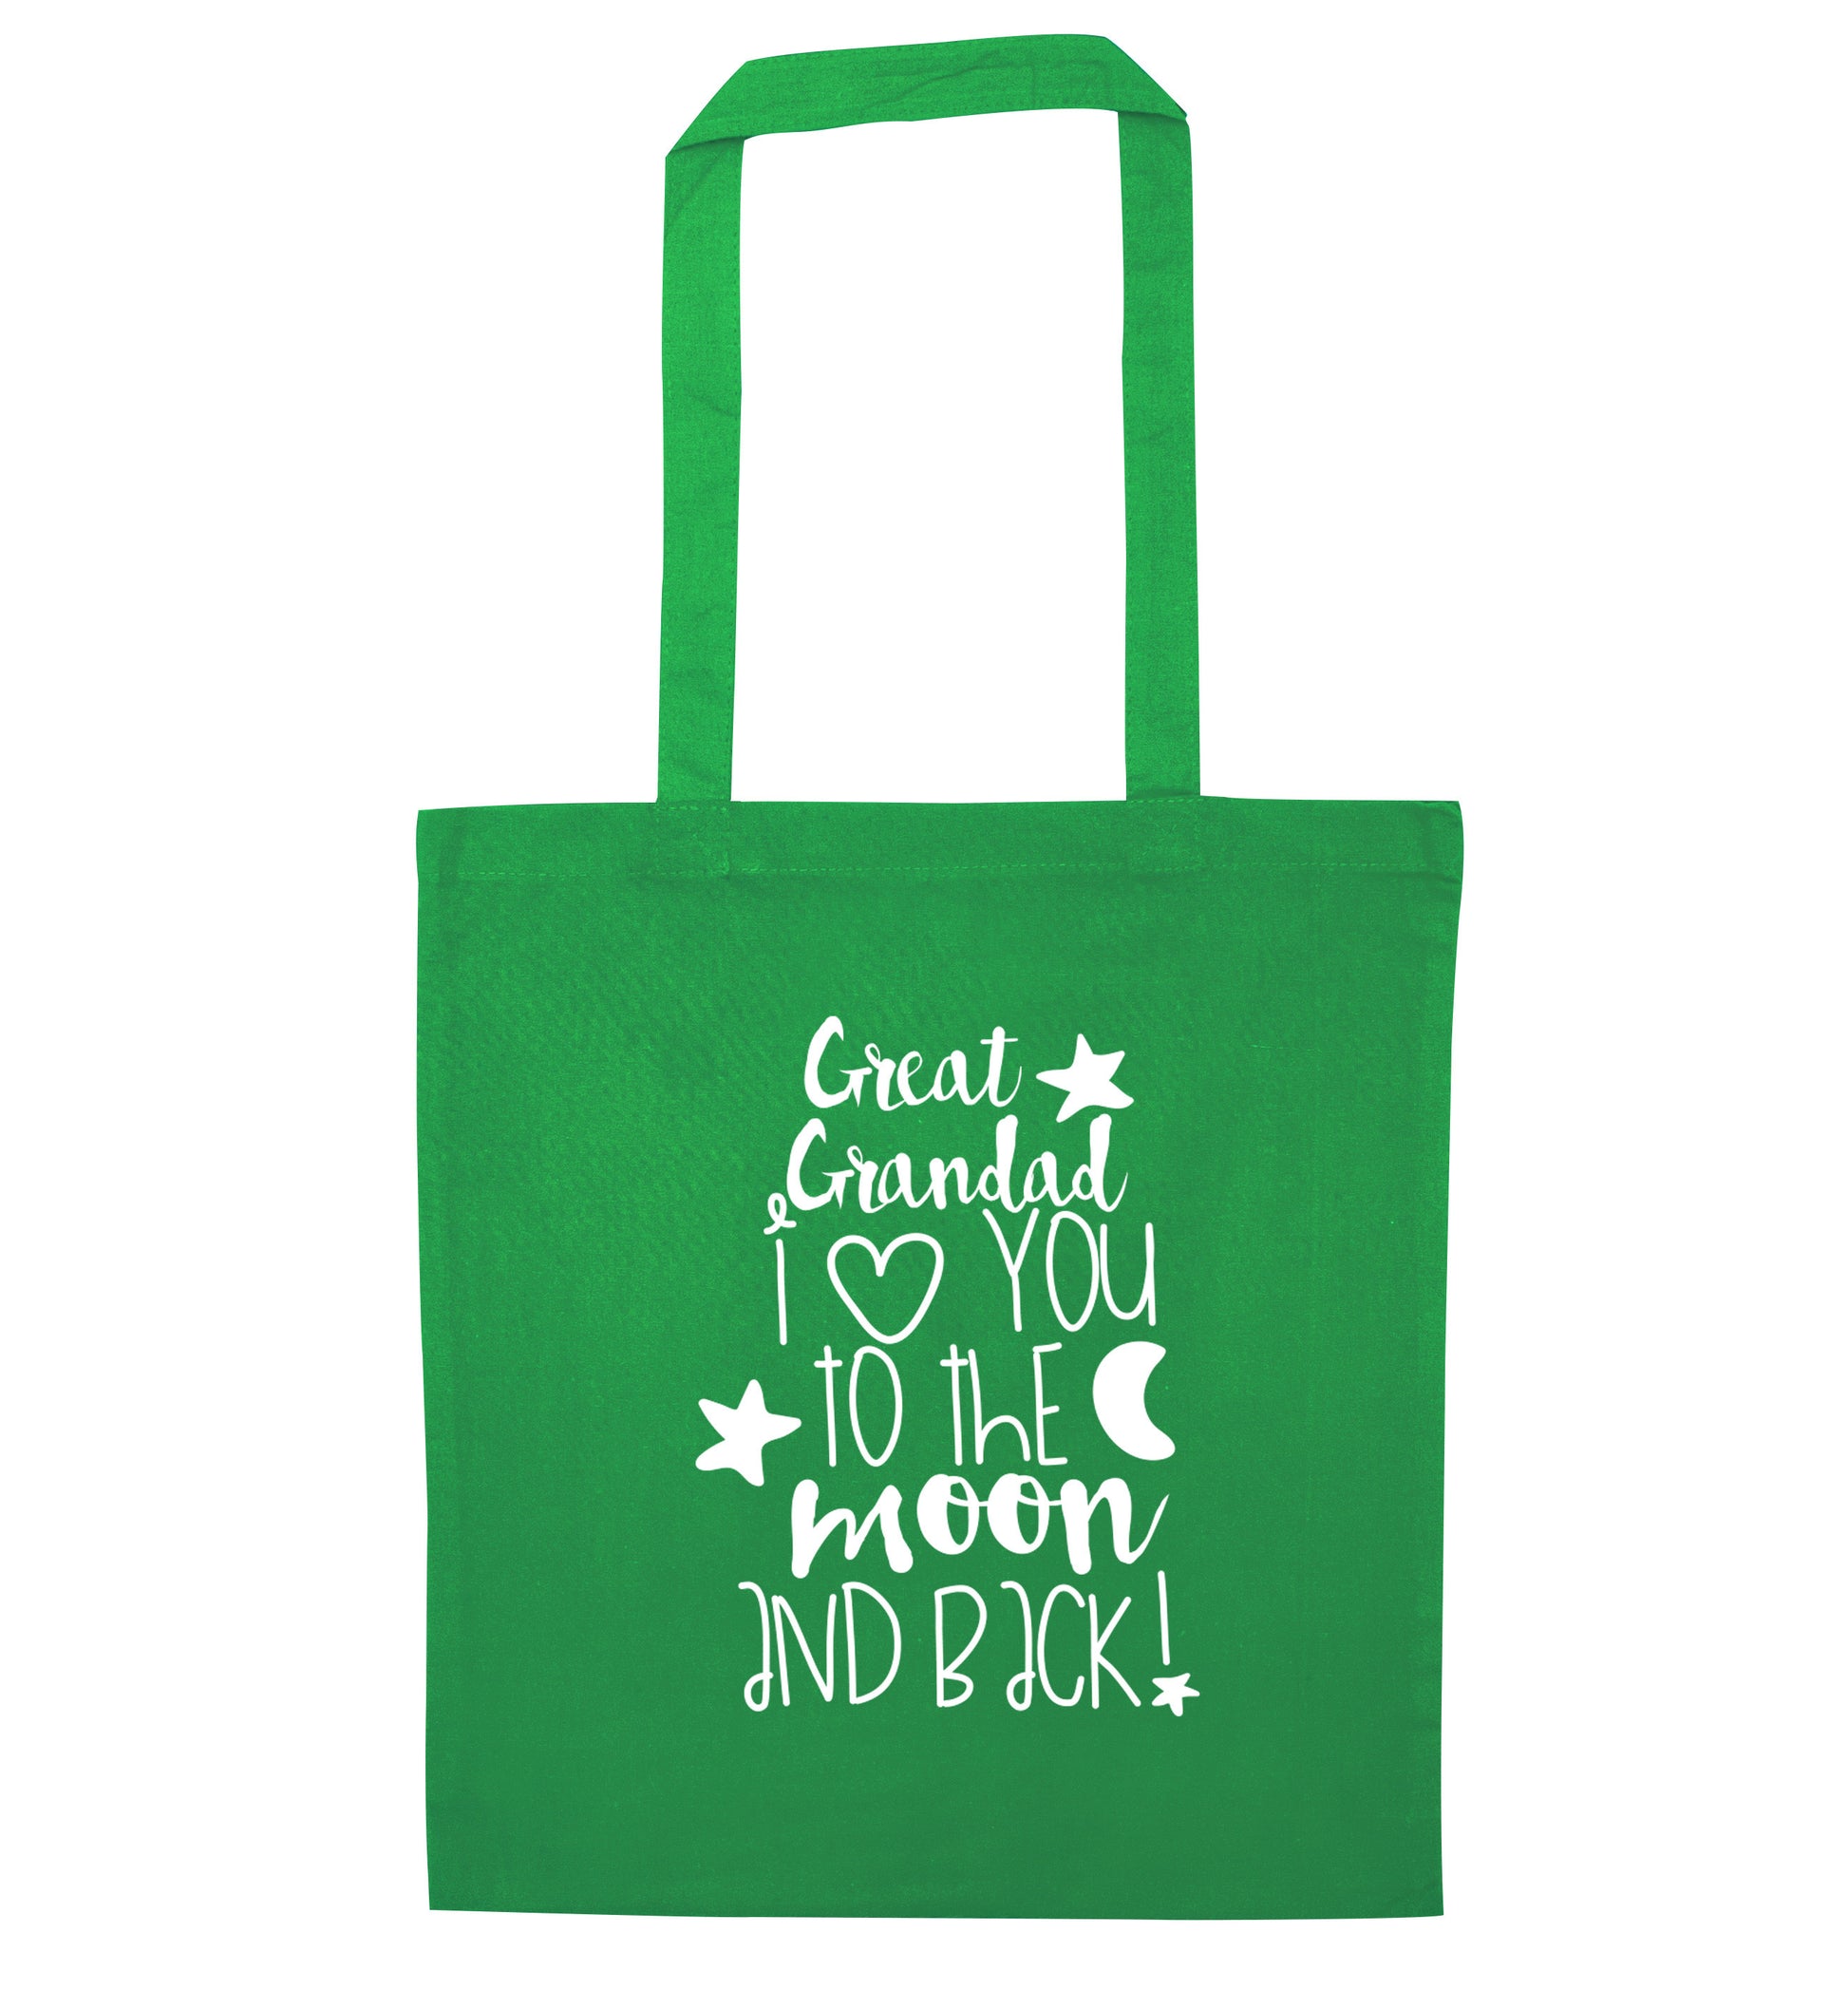 Great Grandad I love you to the moon and back green tote bag